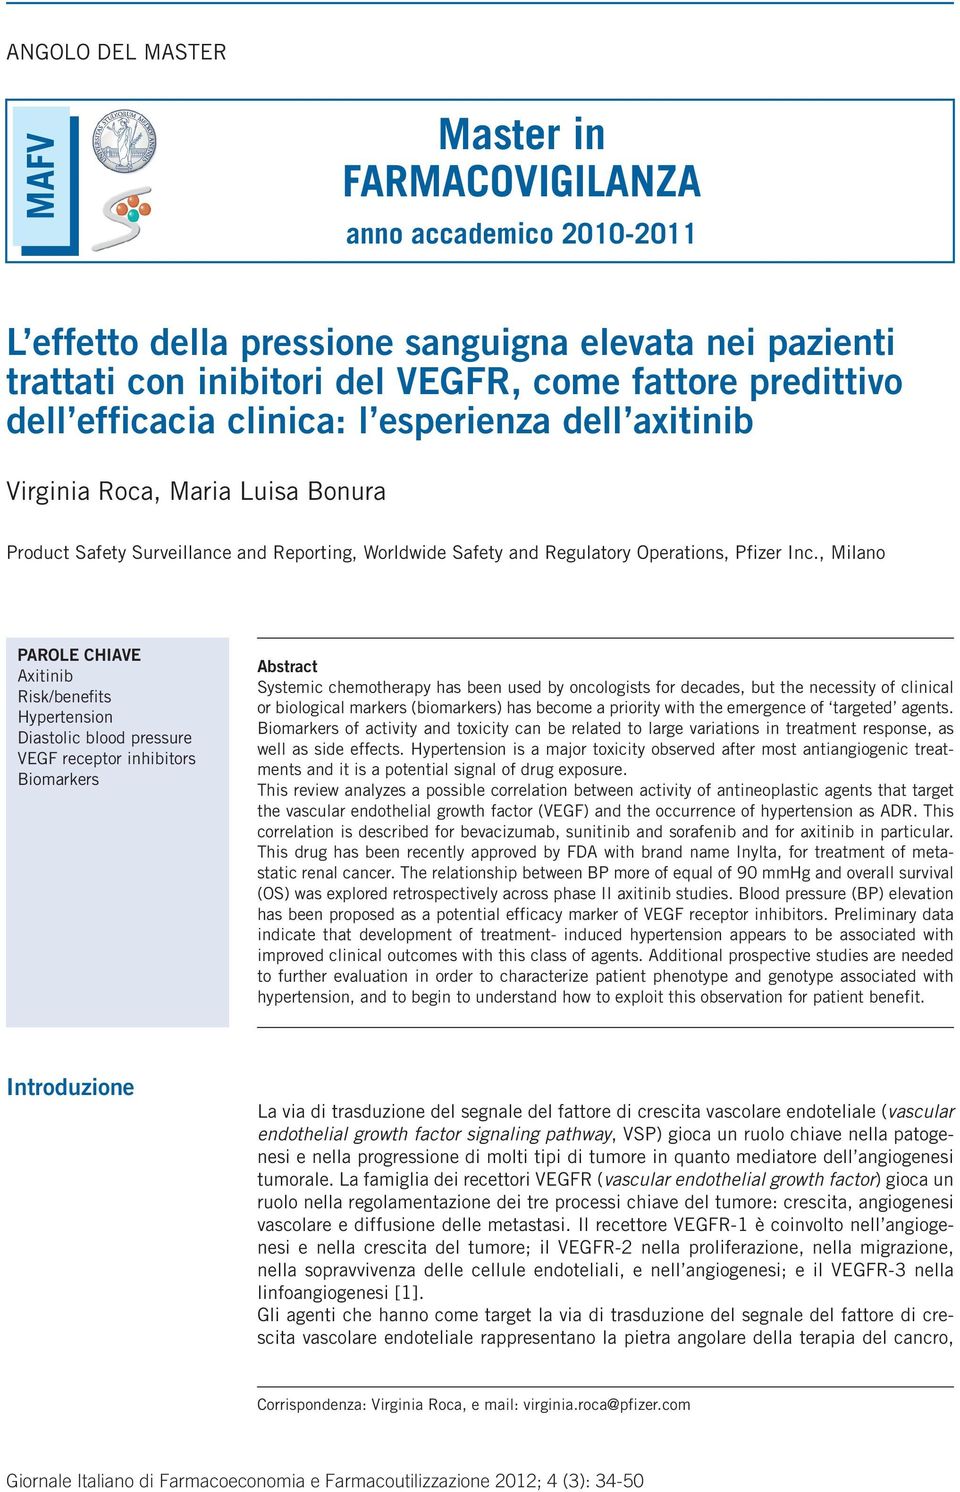 , Milano PAROLE CHIAVE Axitinib Risk/benefits Hypertension Diastolic blood pressure VEGF receptor inhibitors Biomarkers Abstract Systemic chemotherapy has been used by oncologists for decades, but